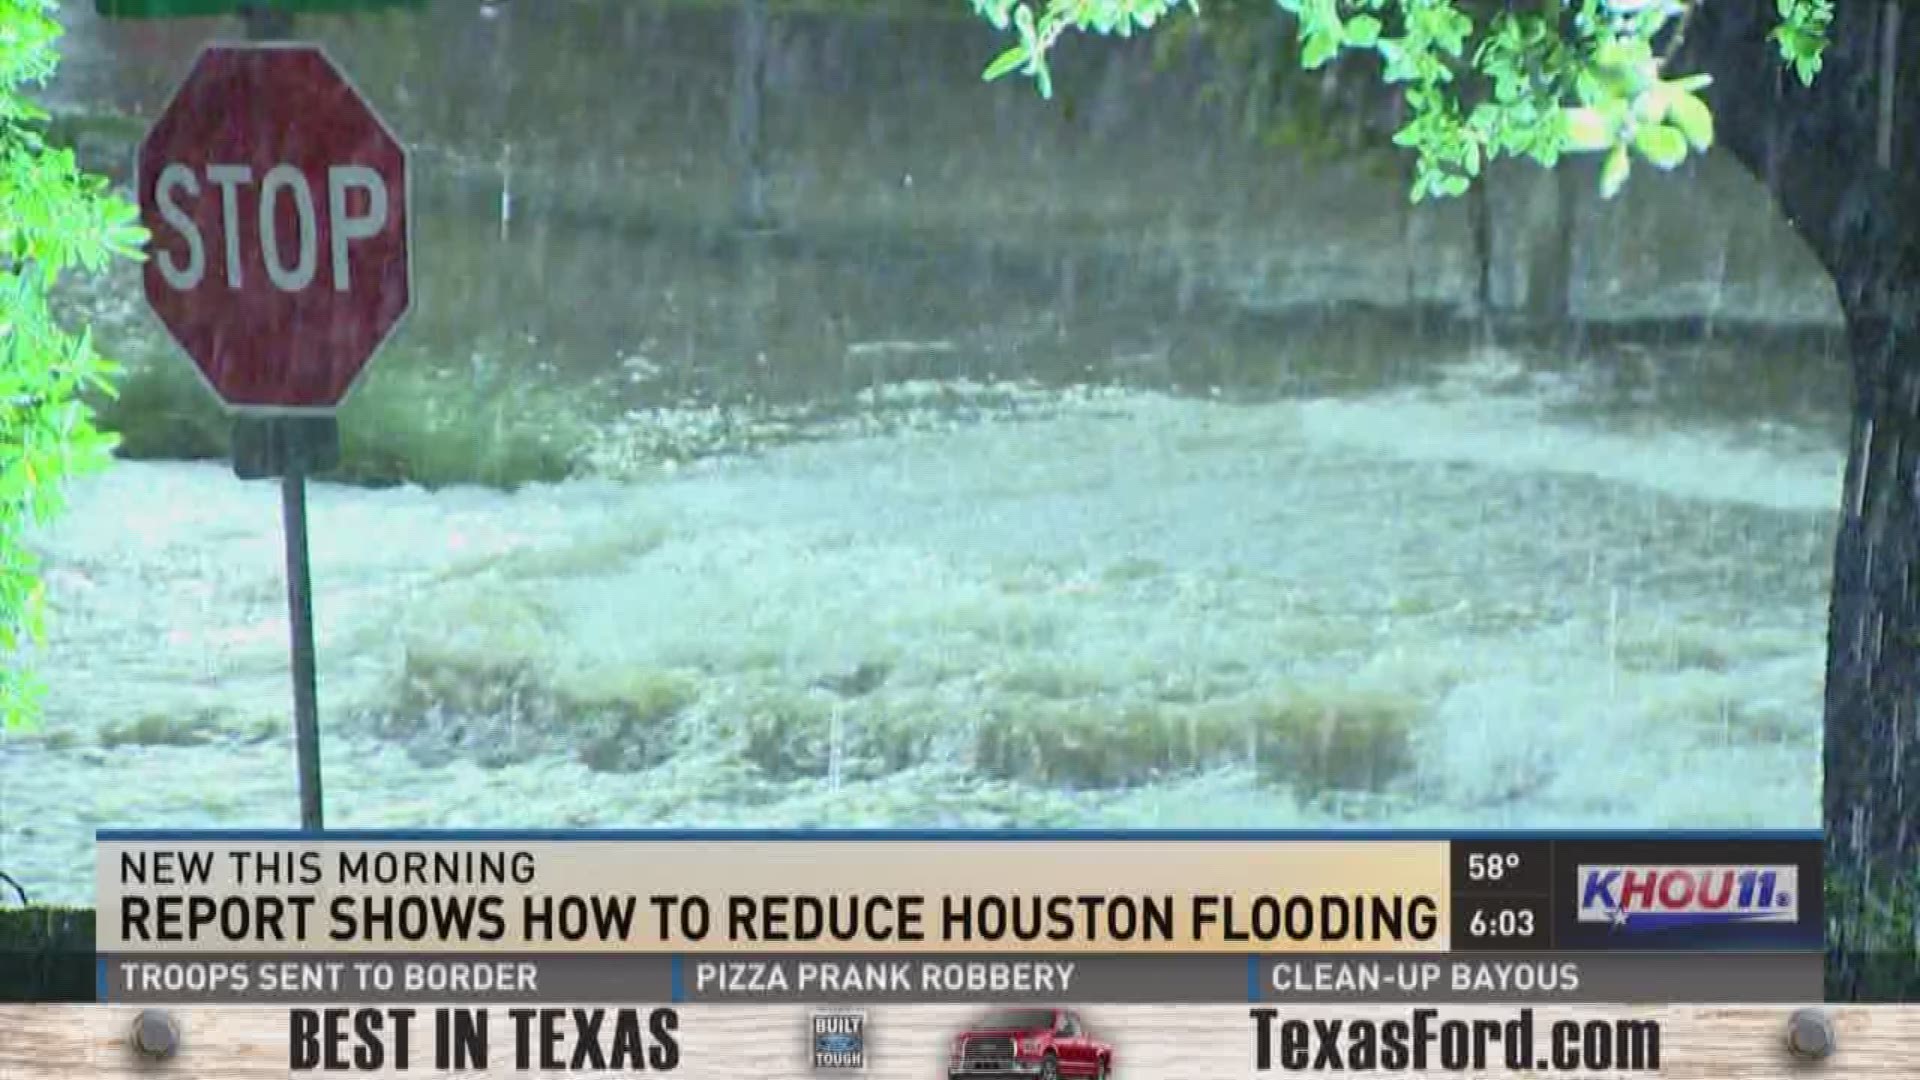 Recommendations for how to address Houston's flood problem were released Thursday morning. They say getting rid of flooding just isn't possible, but there are ways to reduce the impact it has on your life.